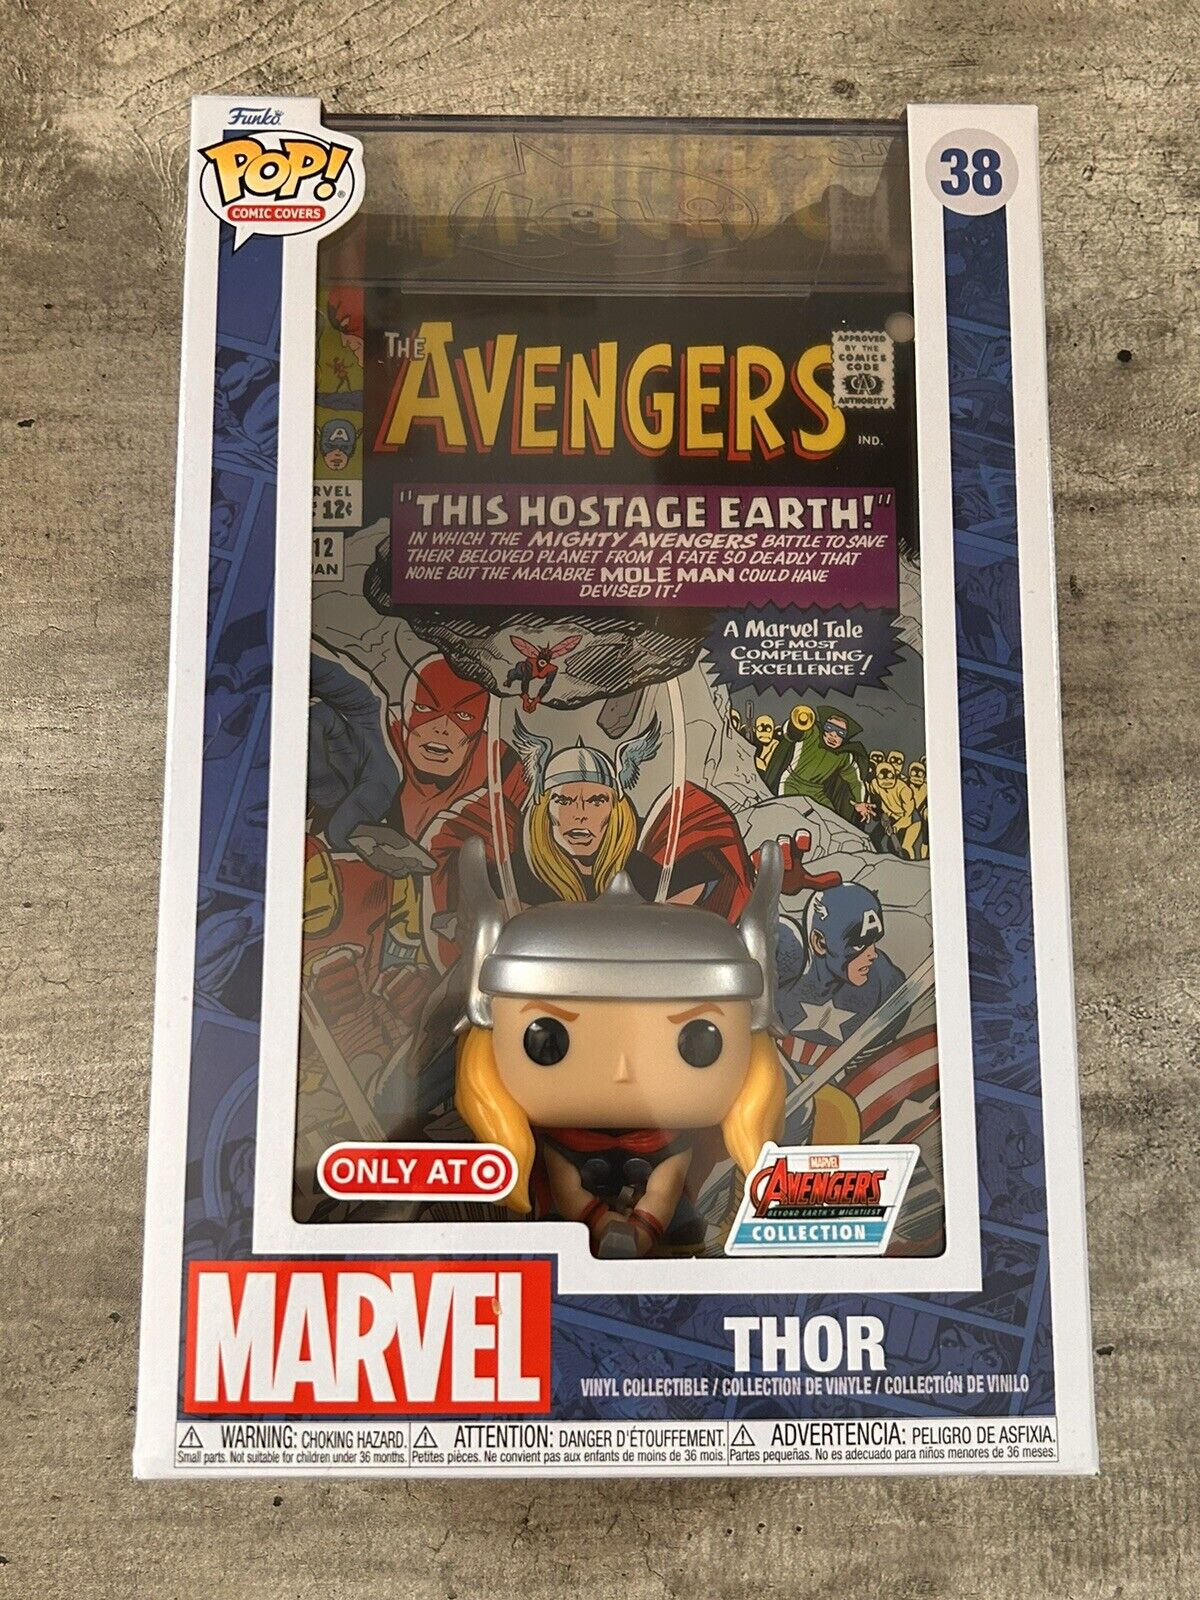 Funko Pop Comic Book Cover with Case: Marvel - Thor - Target (Exclusive) #38